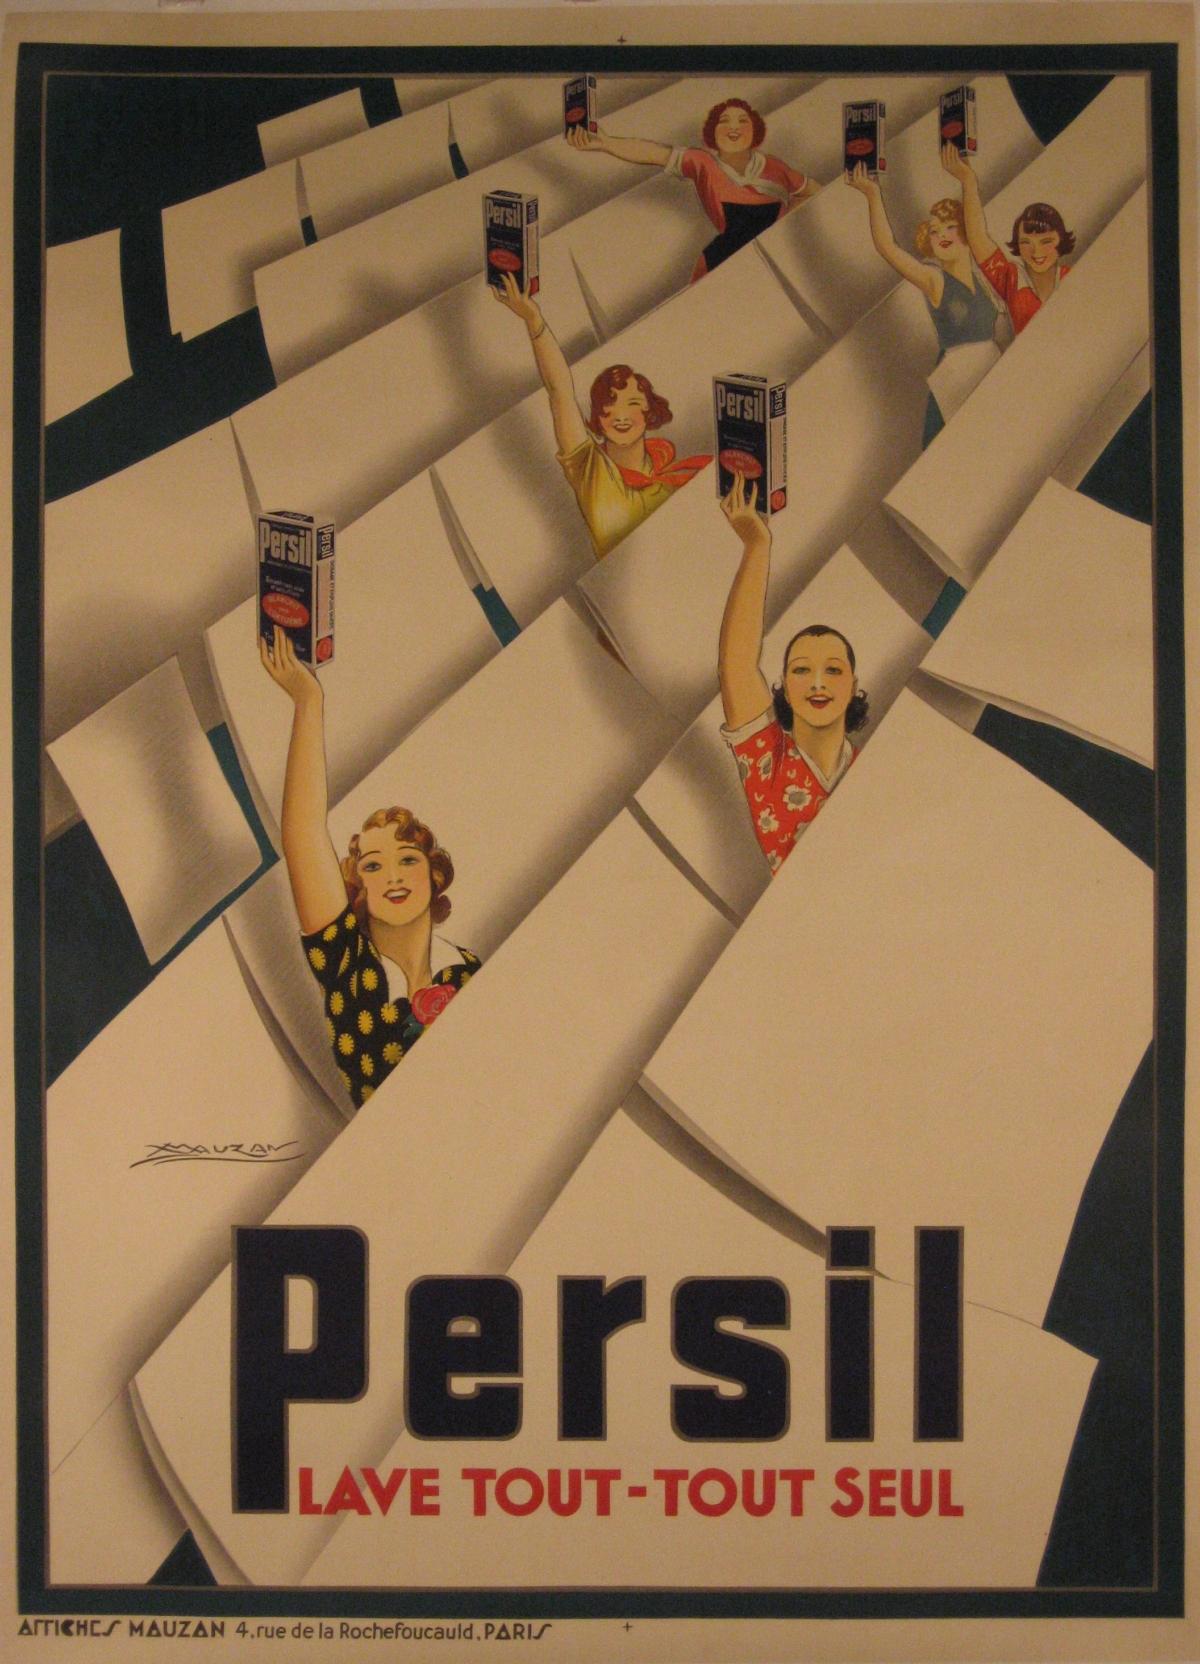 Artist: Luciano Achille Mauzan  (French, 1883 – 1952)

Date of Origin: 1935

Medium: Original Stone Lithograph Vintage Poster

Size: 45” x 61”

 

This large poster is, in fact, the smallest of three formats for Persil featuring the artwork of